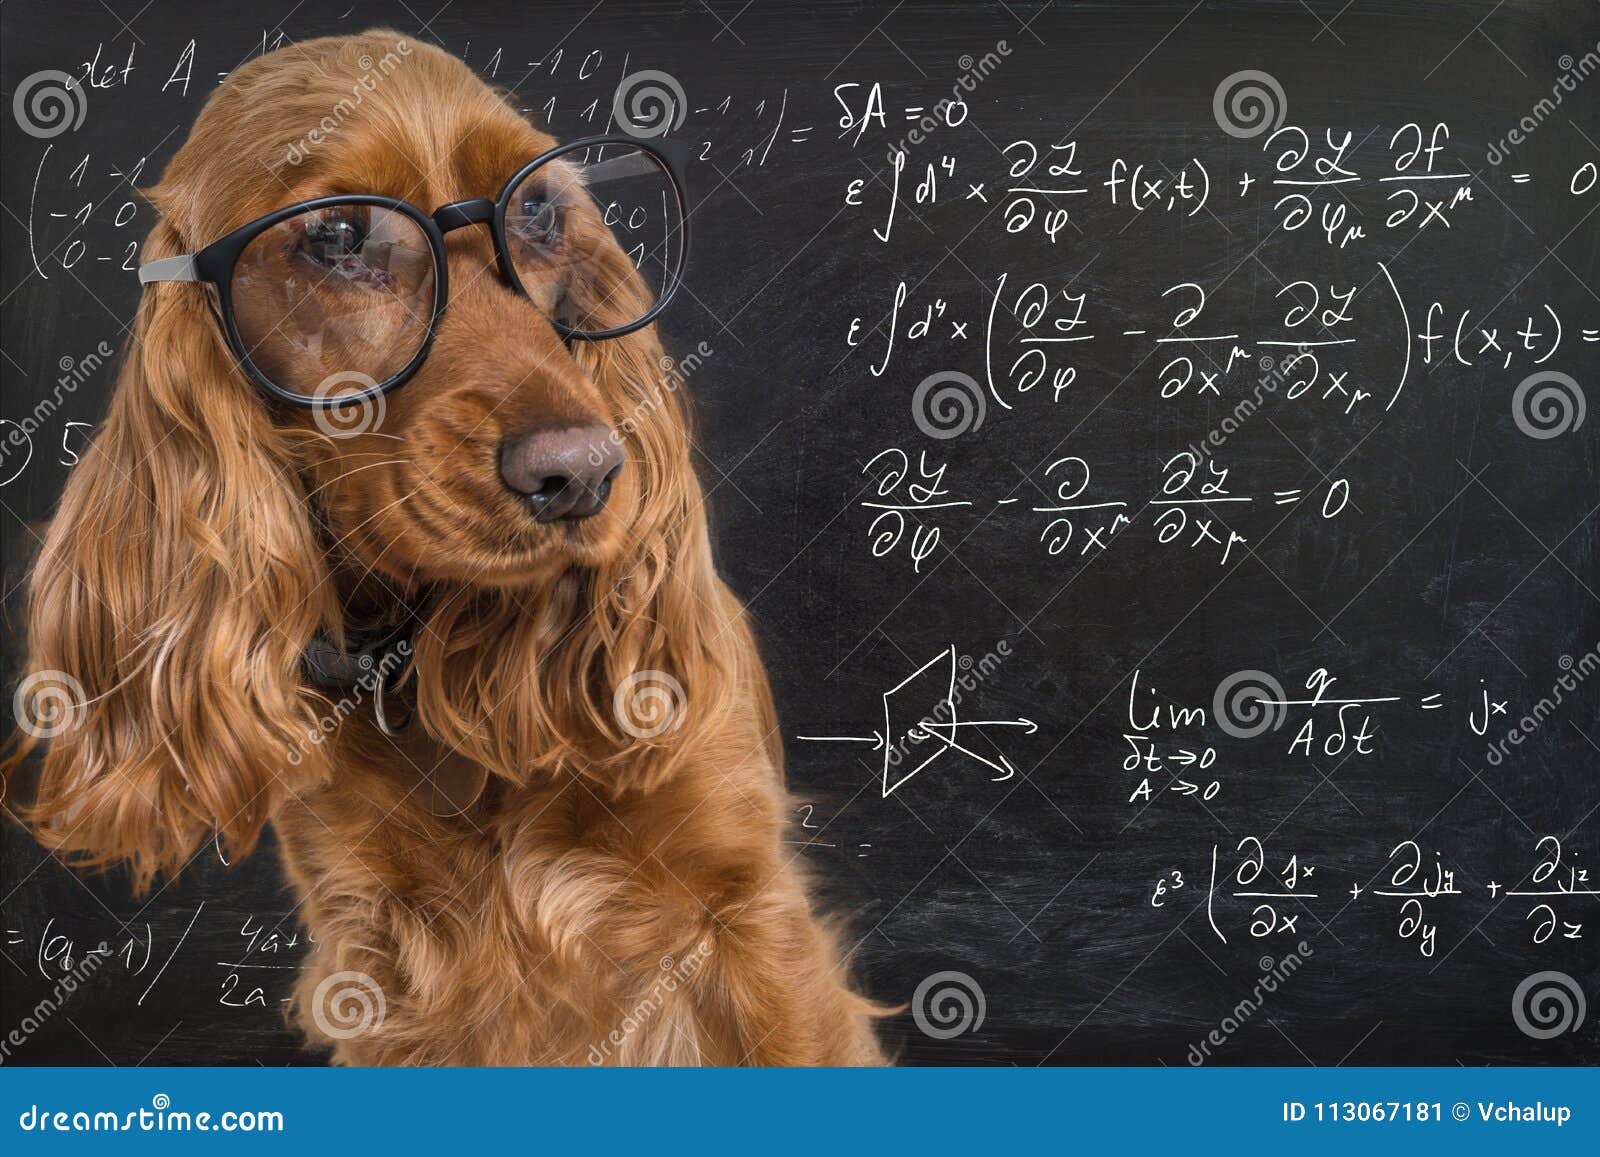 clever funny dog wearing eyeglasses. math equations on blackboard in background